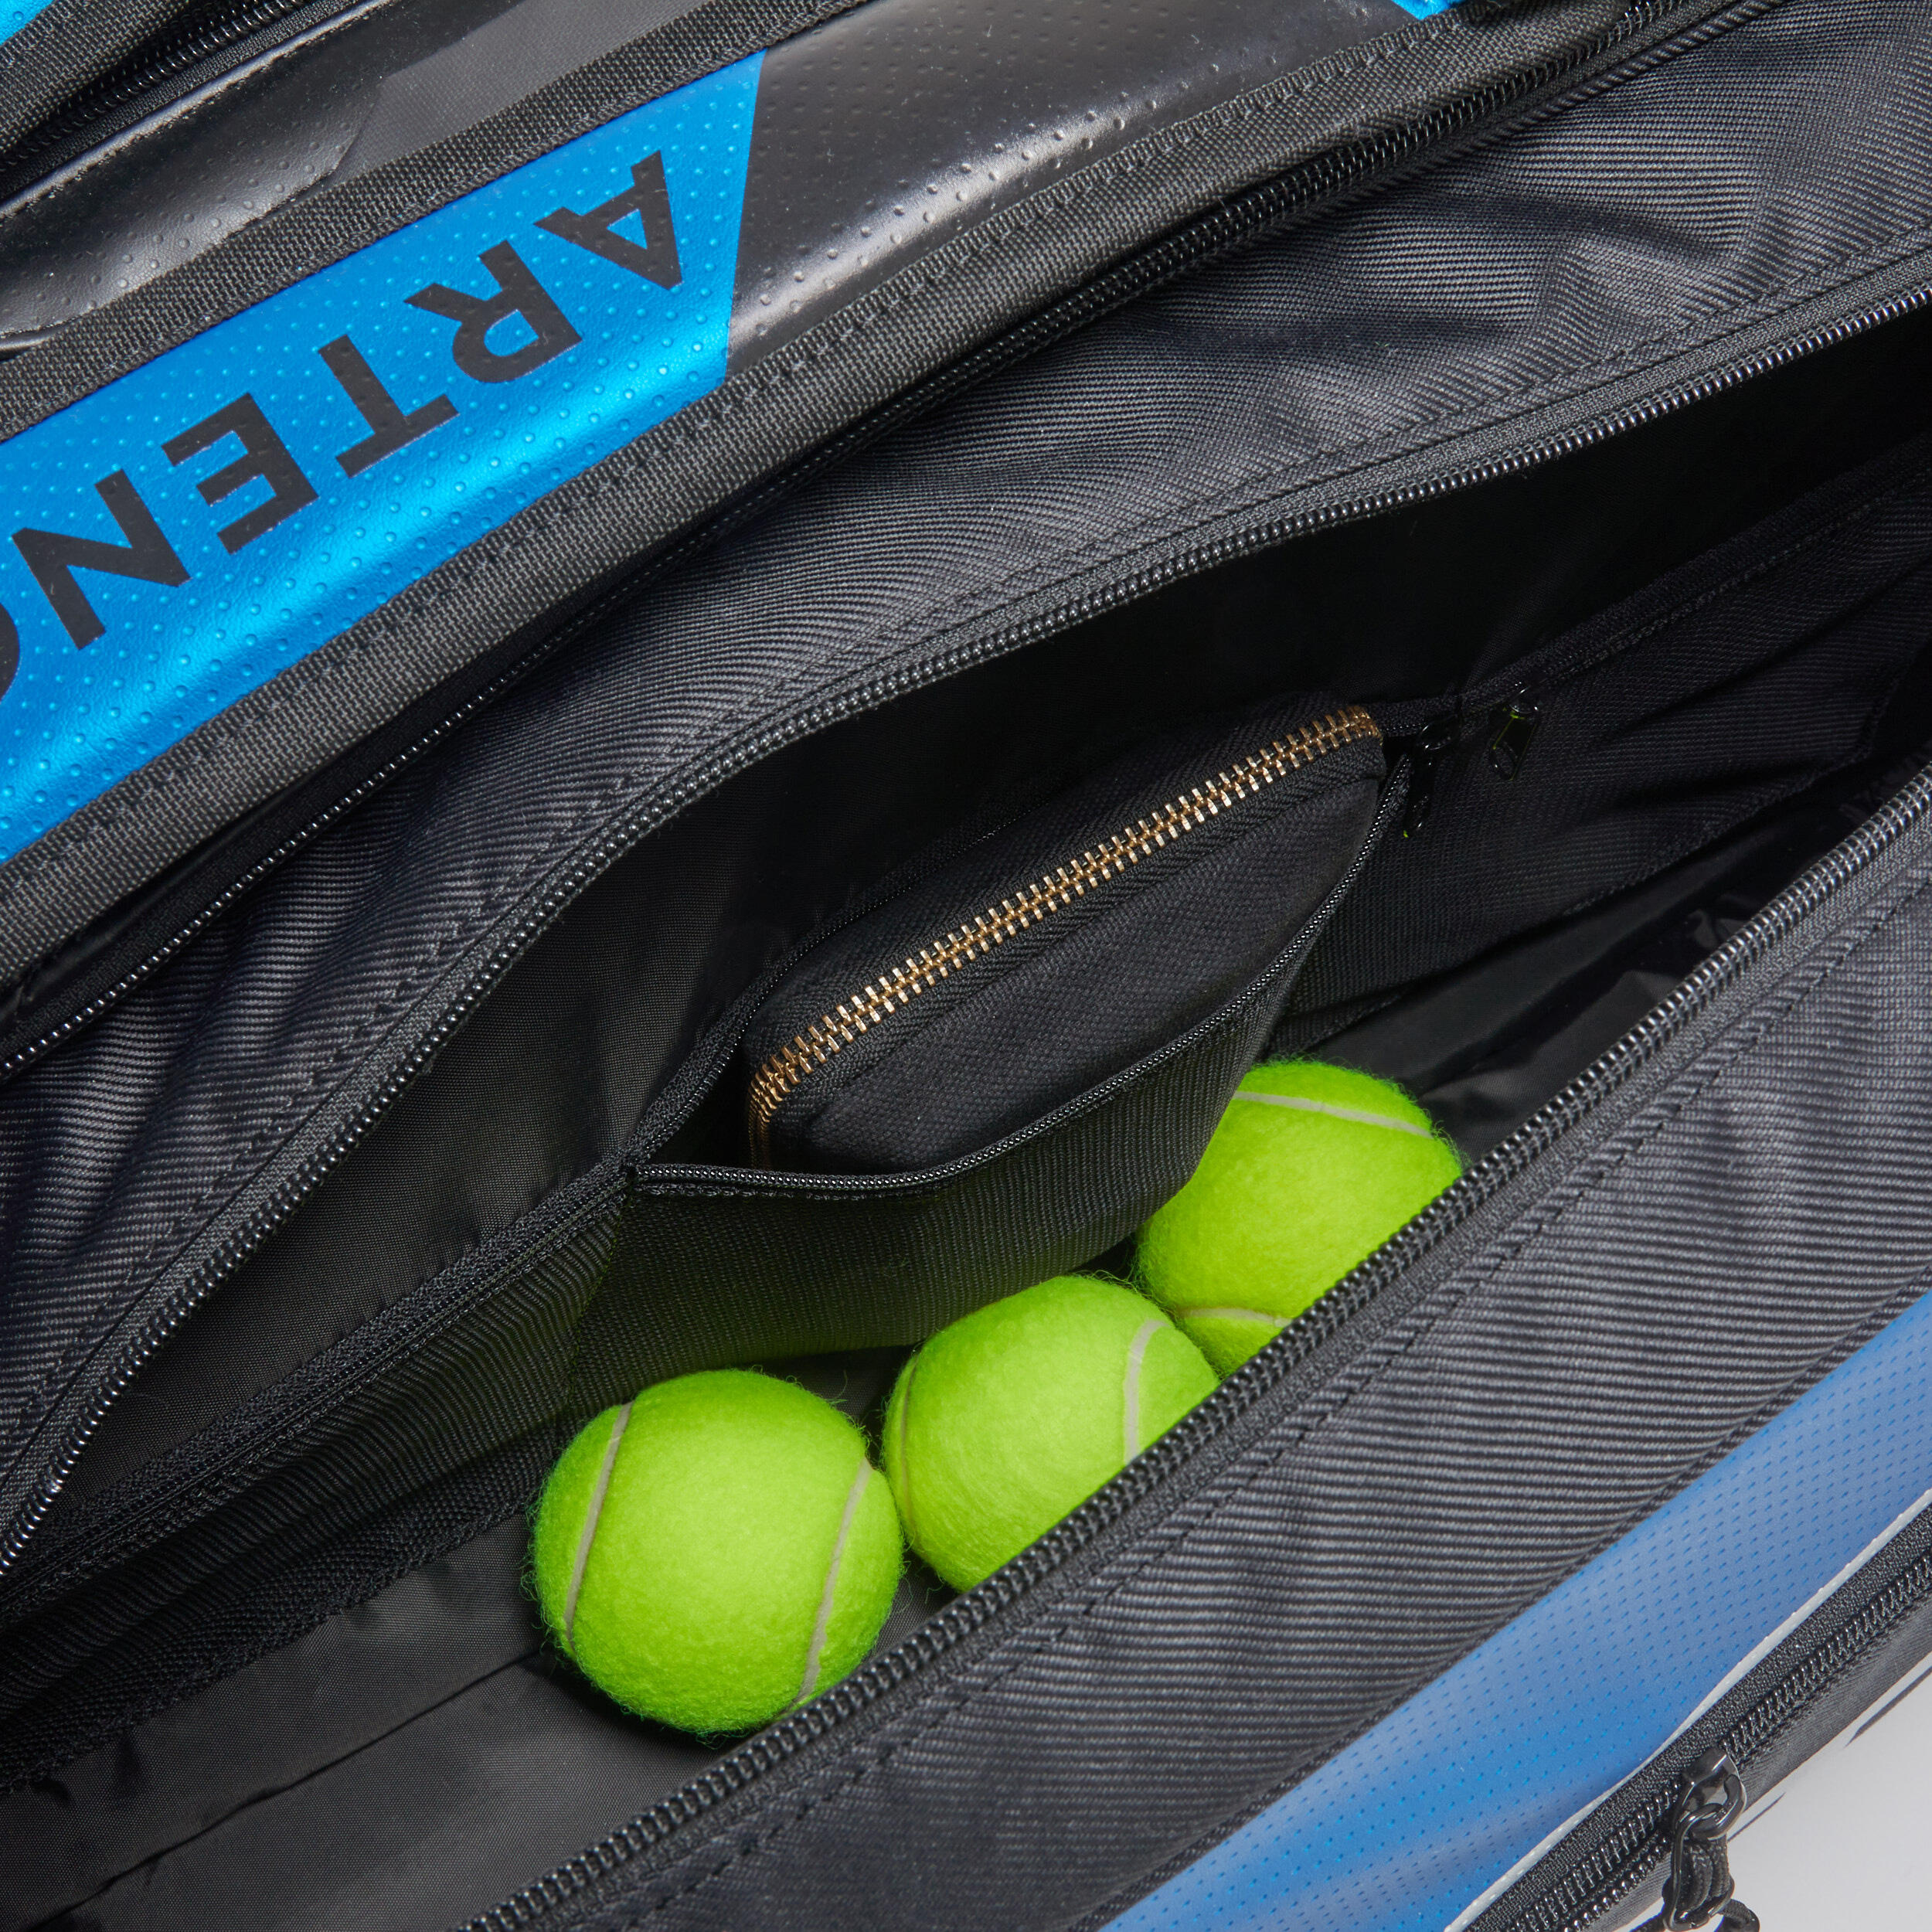 Insulated 12-Racket Tennis Bag XL Pro - Black/Blue Spin 8/10